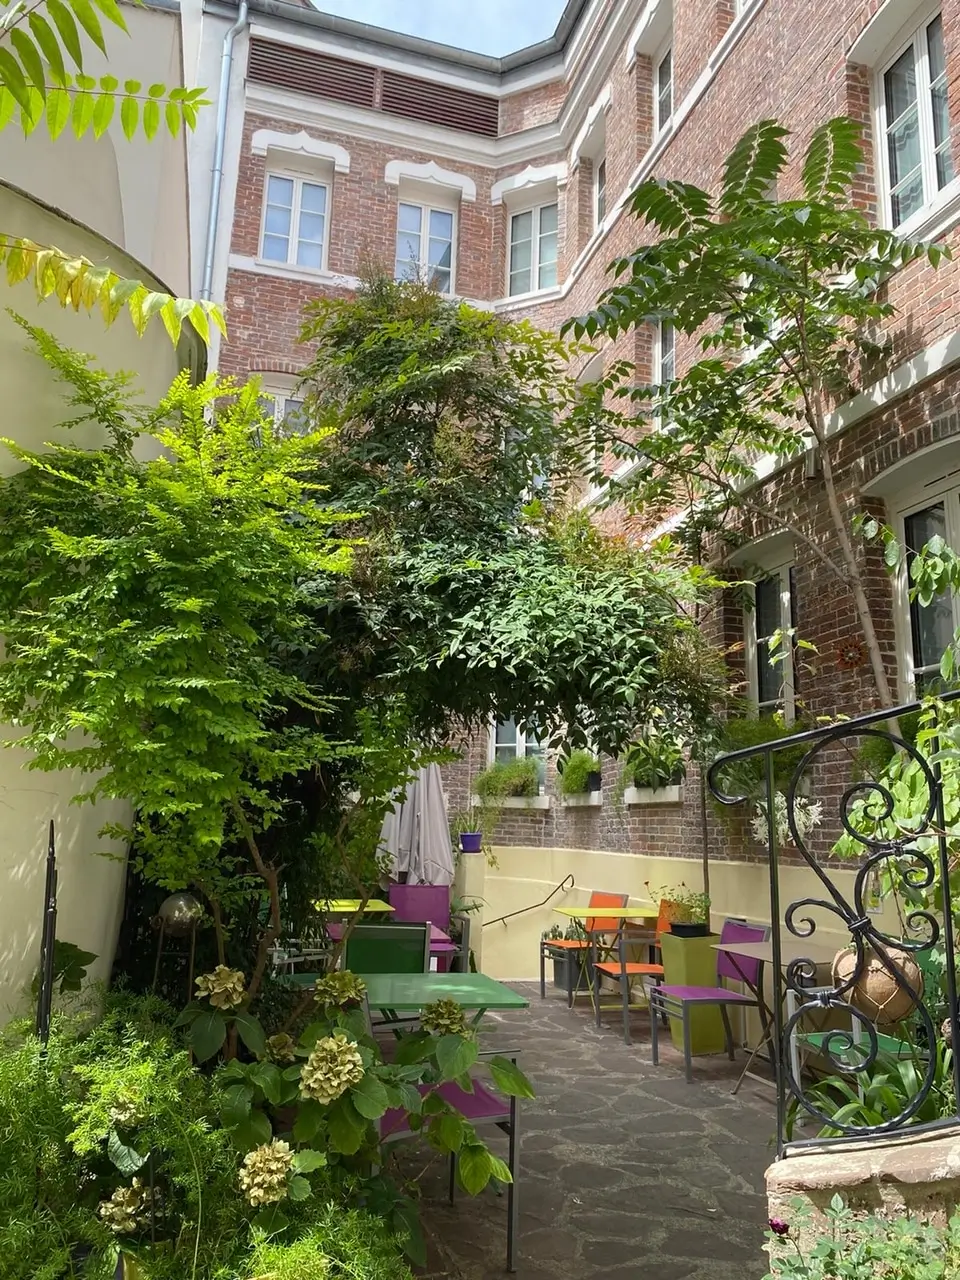 A tranquil garden space at Hotel Pavillon Paris, showcasing eco-friendly outdoor seating amidst vibrant greenery and blooming flowers for a serene urban retreat.